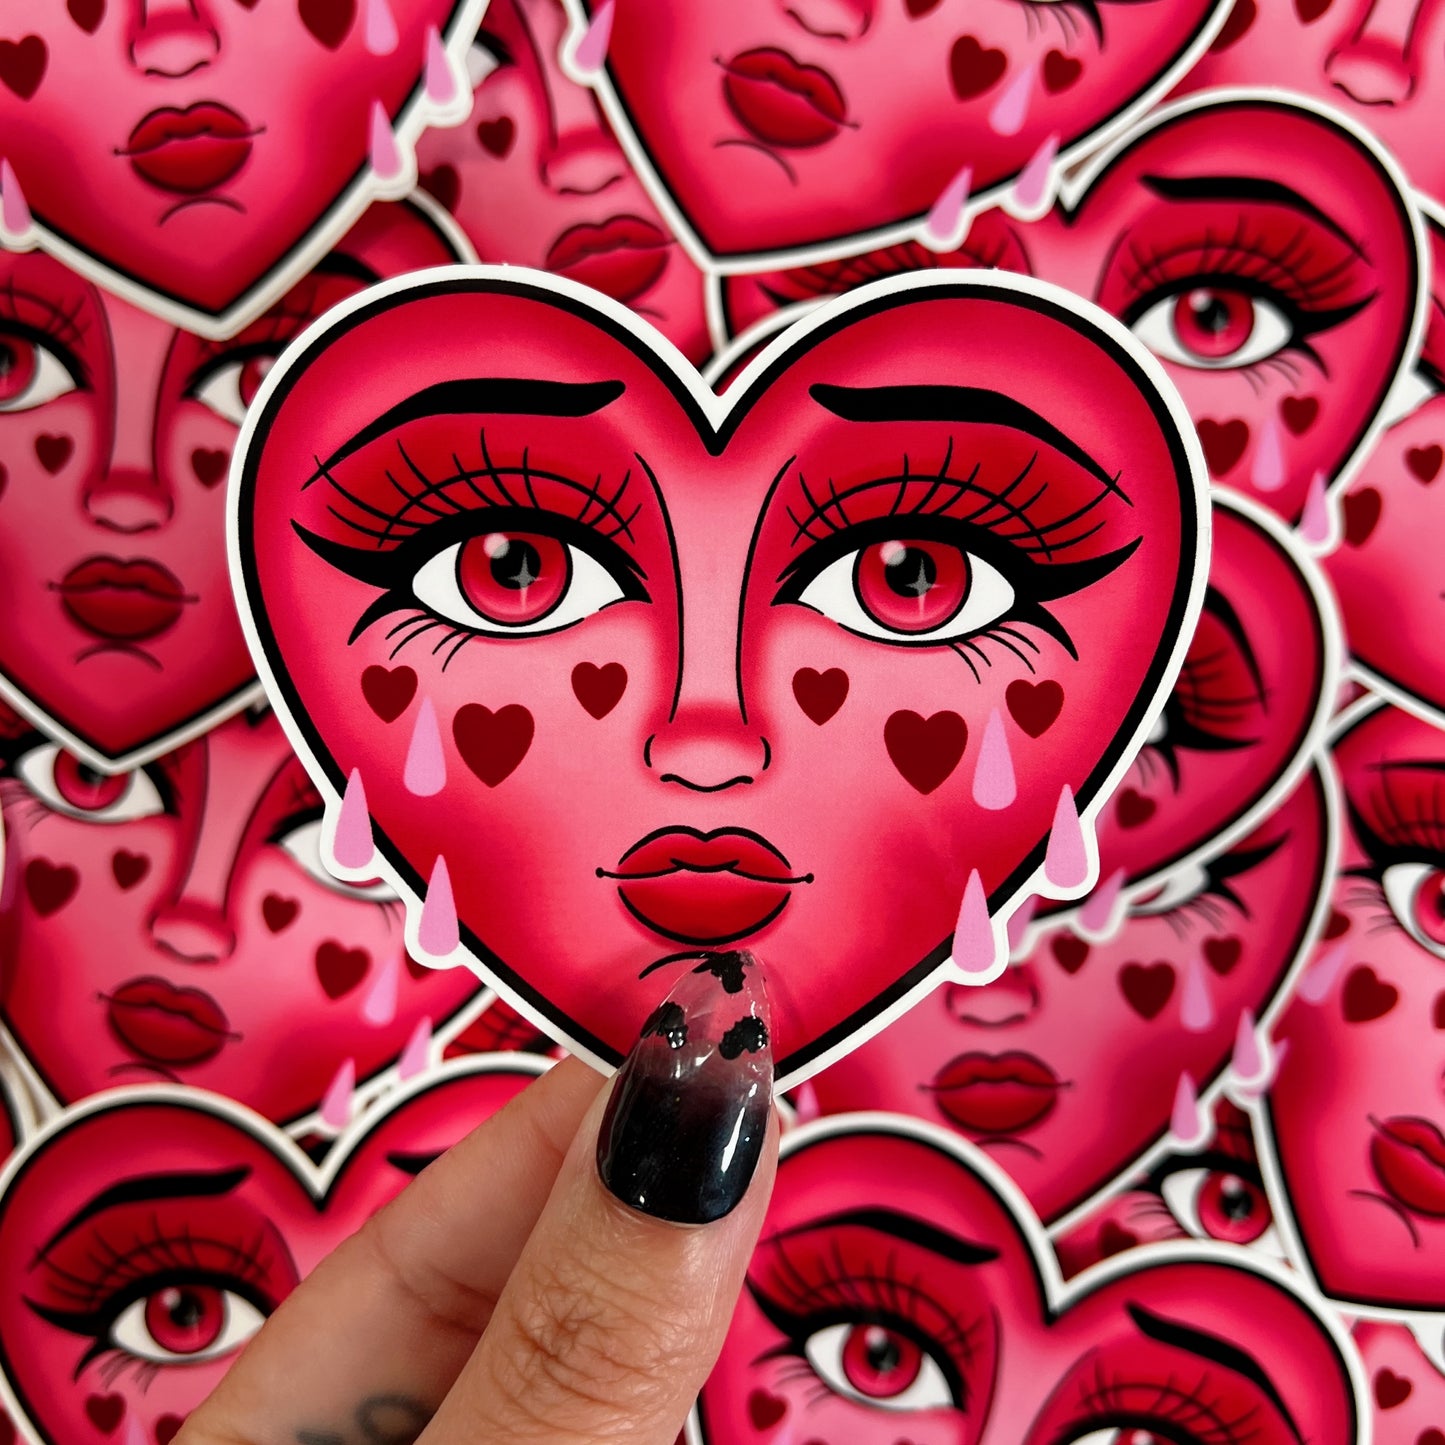 Crying Heart - Sticker